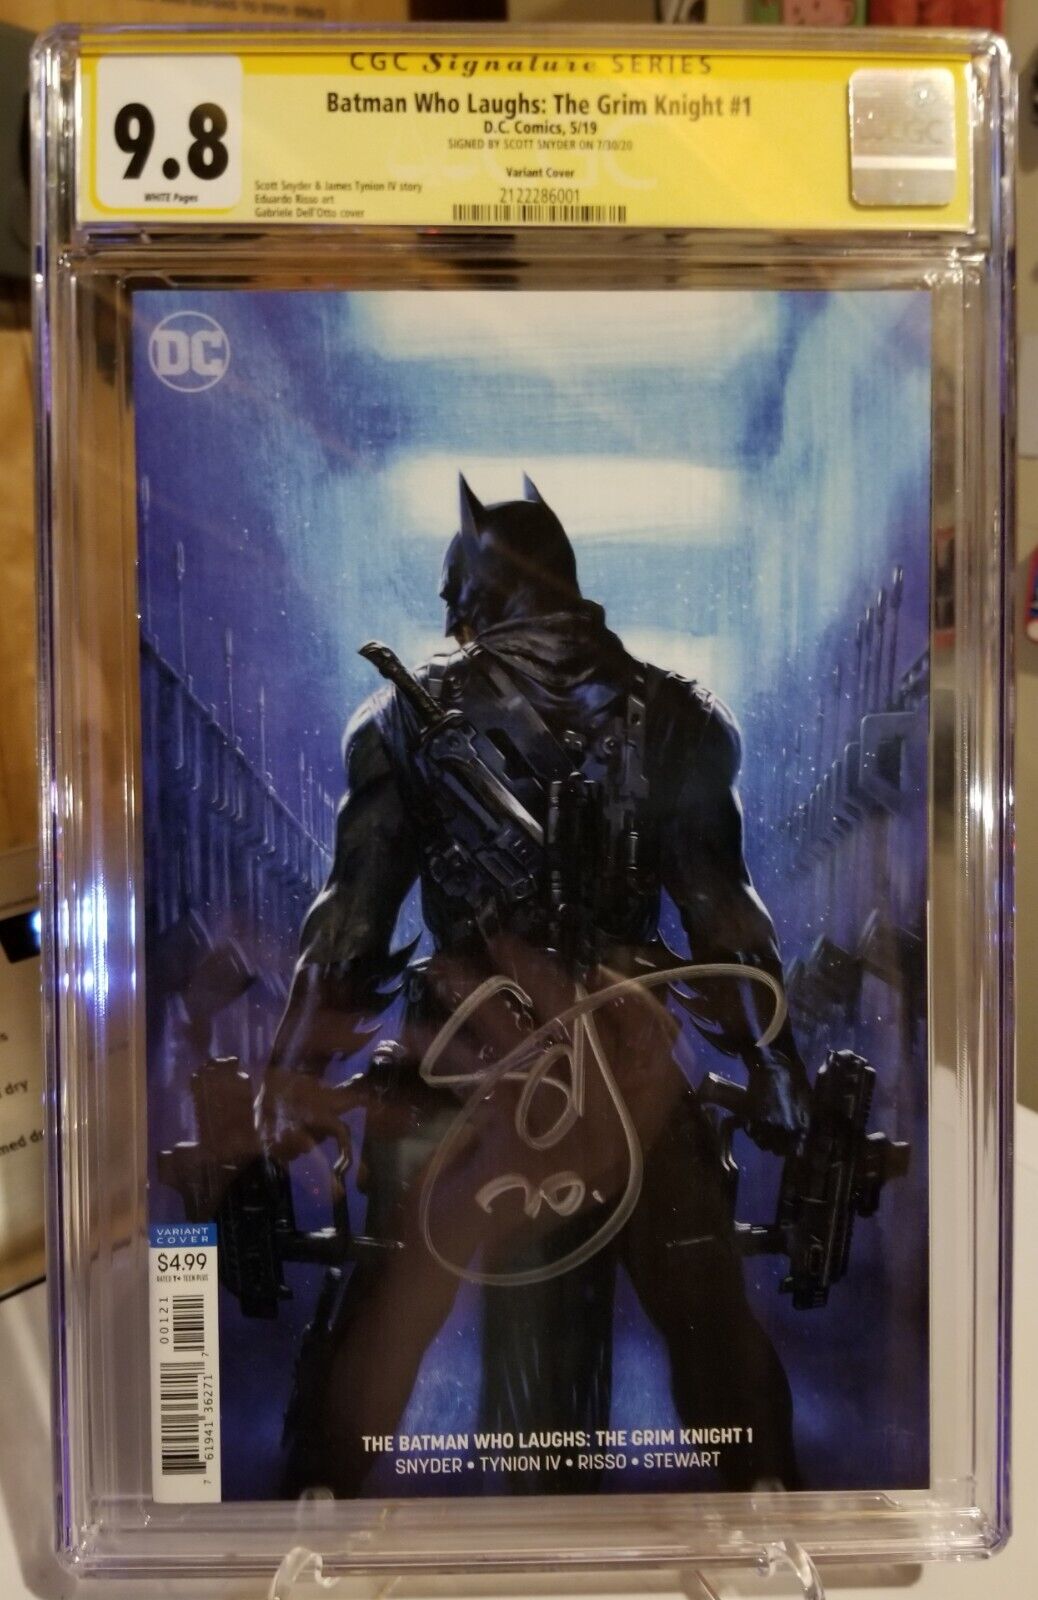 Batman Who Laughs: The Grim Knight #1 Signed CGC 9.8 Scott Snyder Graded Comic